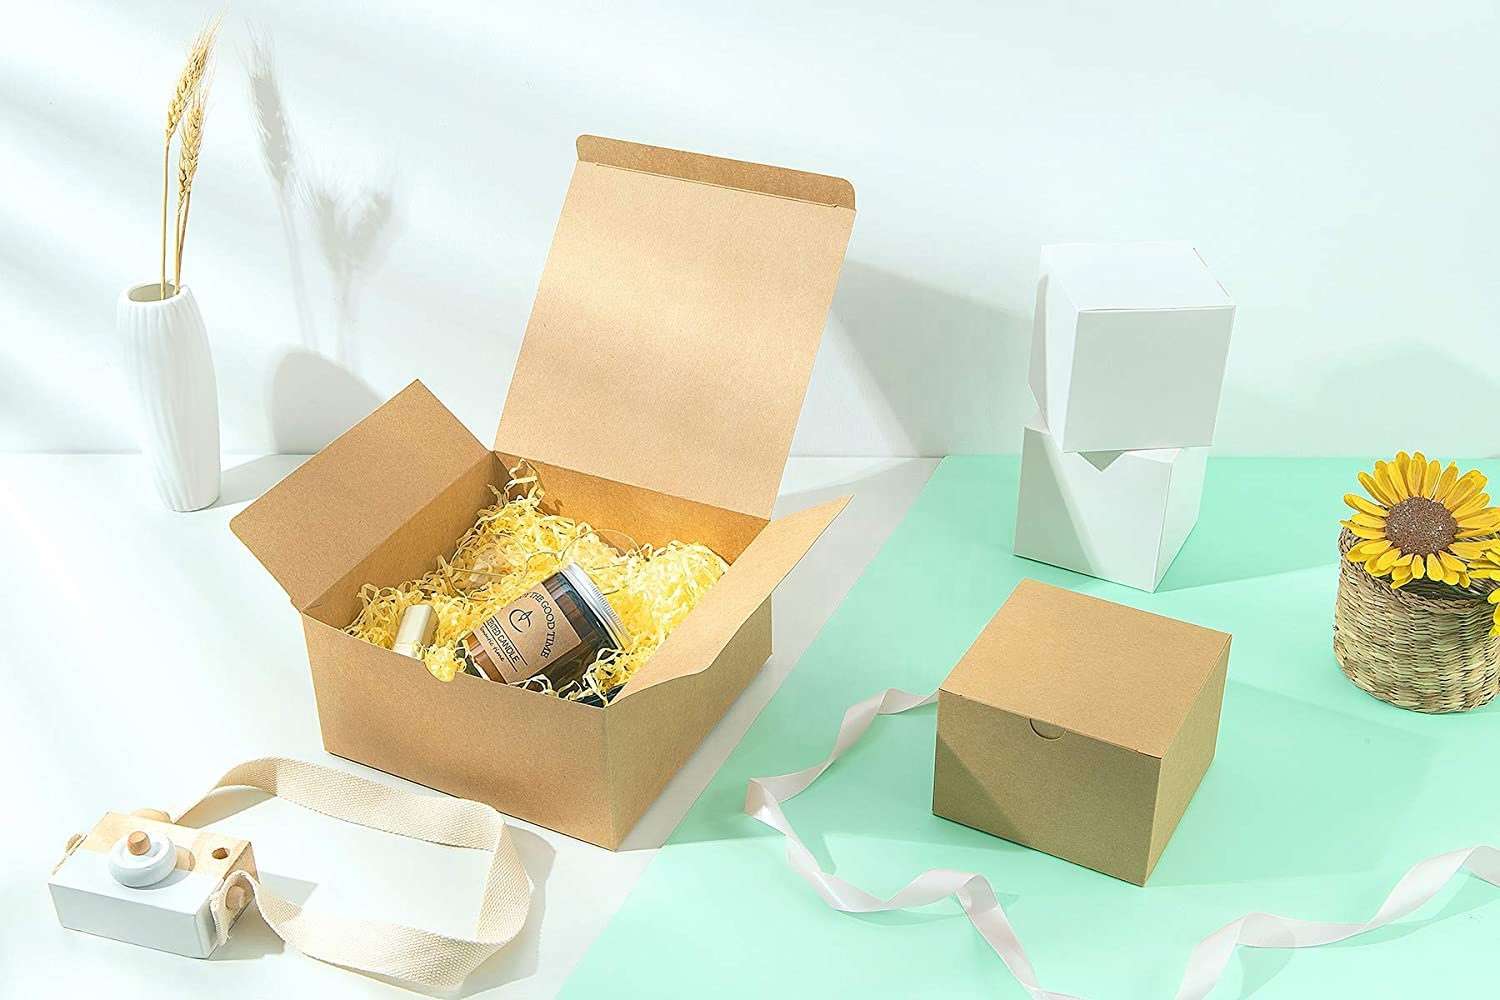 Custom Eco Friendly Packaging BrownCupcake Box Crafting Festival Birthday Party Weddding Gift Boxes